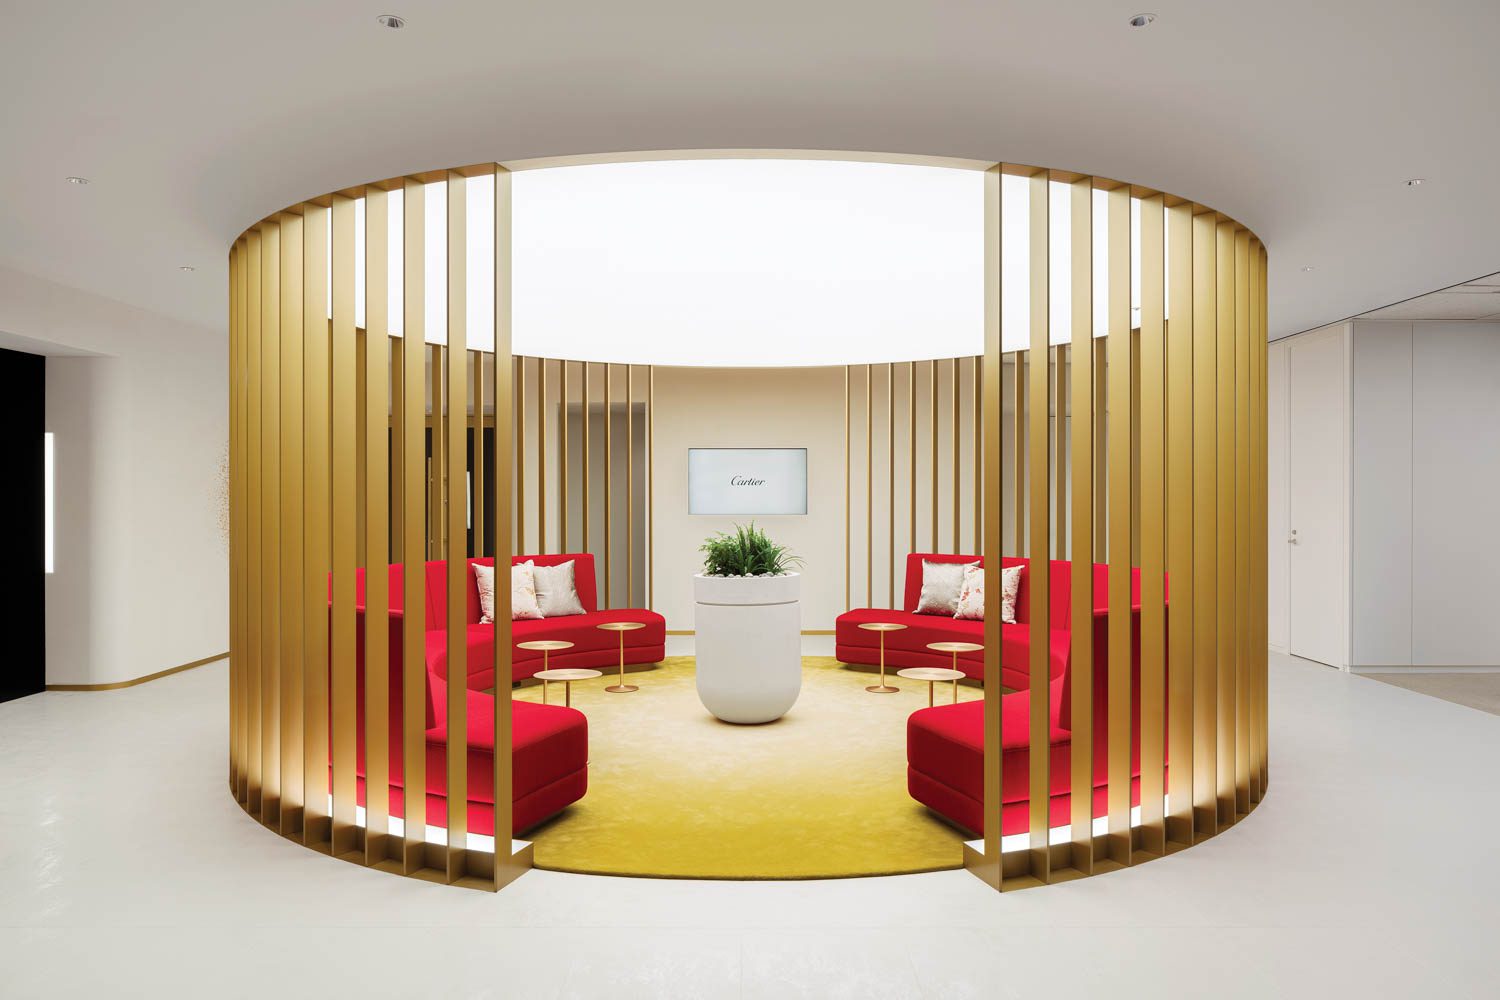 A Cartier office in Tokyo by design firm I IN features upholstery in the brand’s signature red paired with gold-finished furnishings and artwork, plus a raised tatami-mat employee lounge.